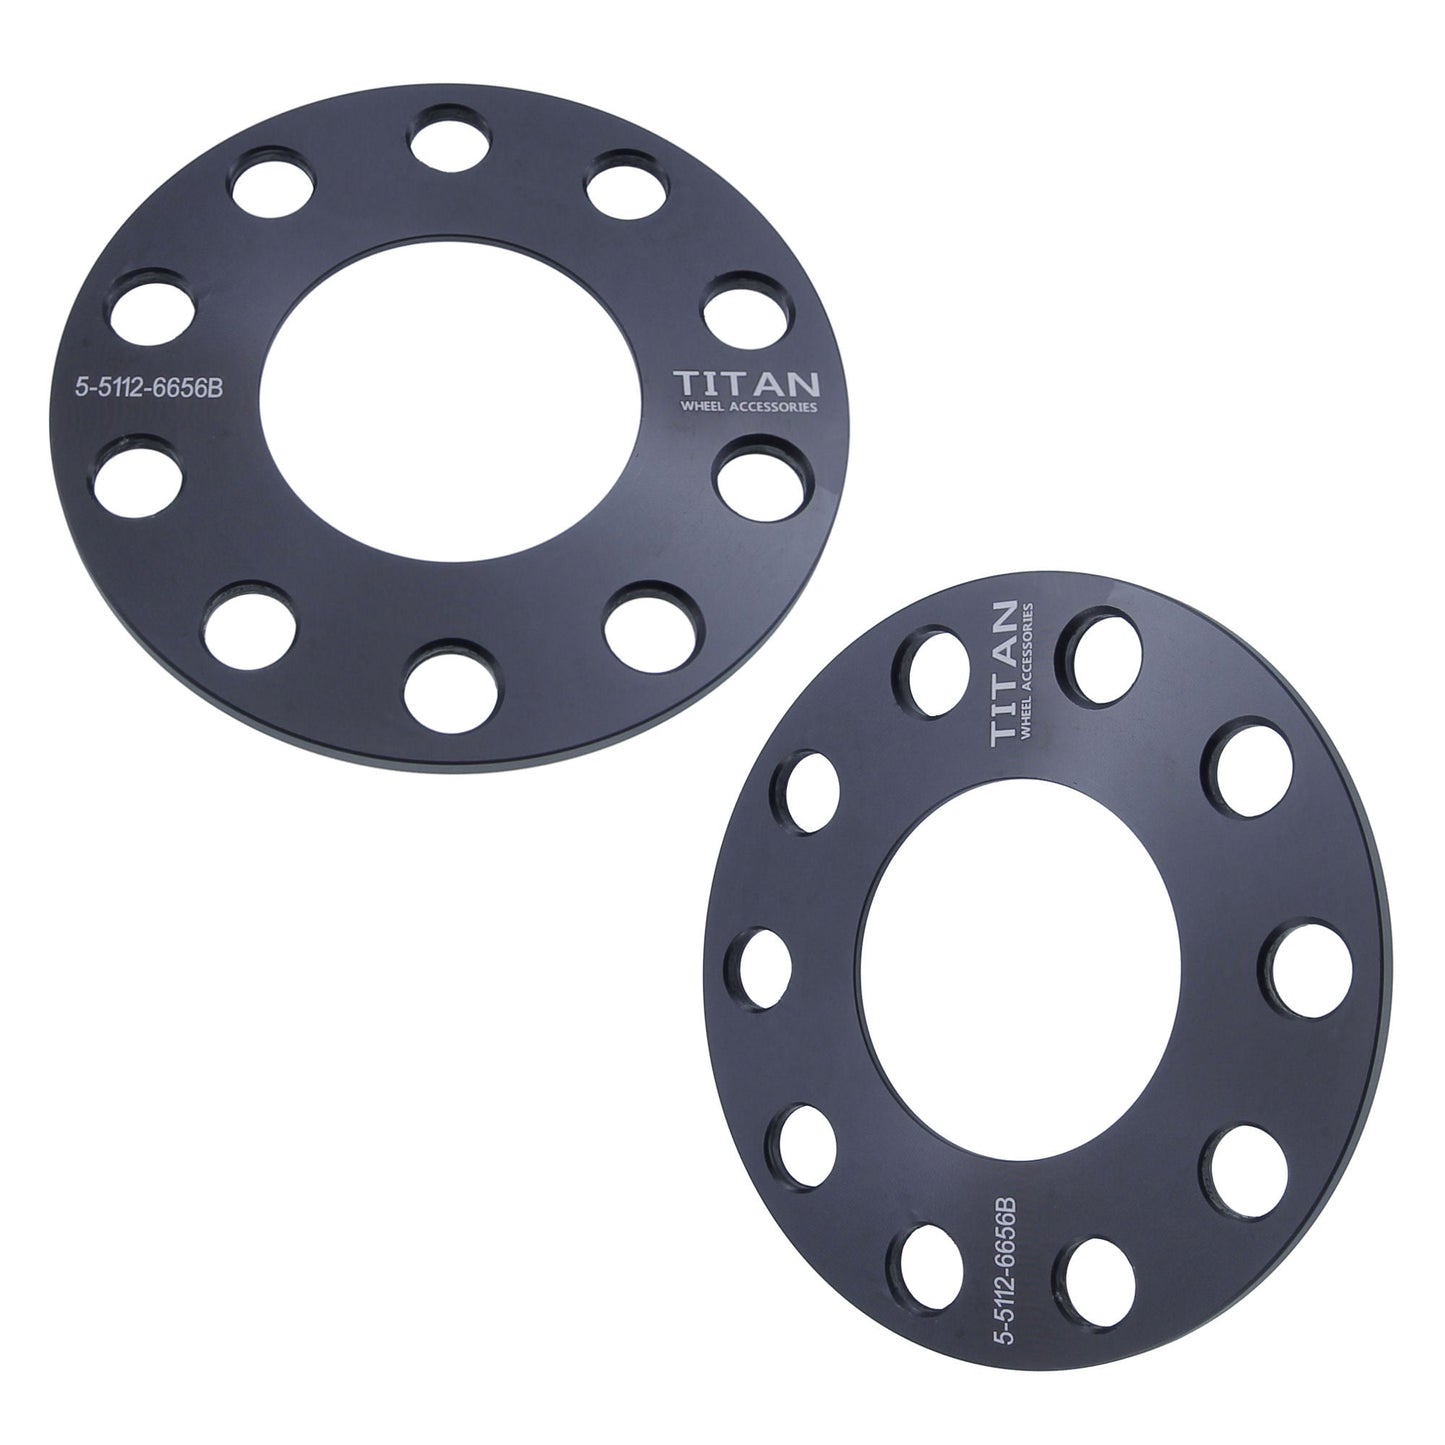 5mm Titan Wheel Spacers for VW Audi | 5x112 | 66.56 Hubcentric | Set of 4 | Titan Wheel Accessories